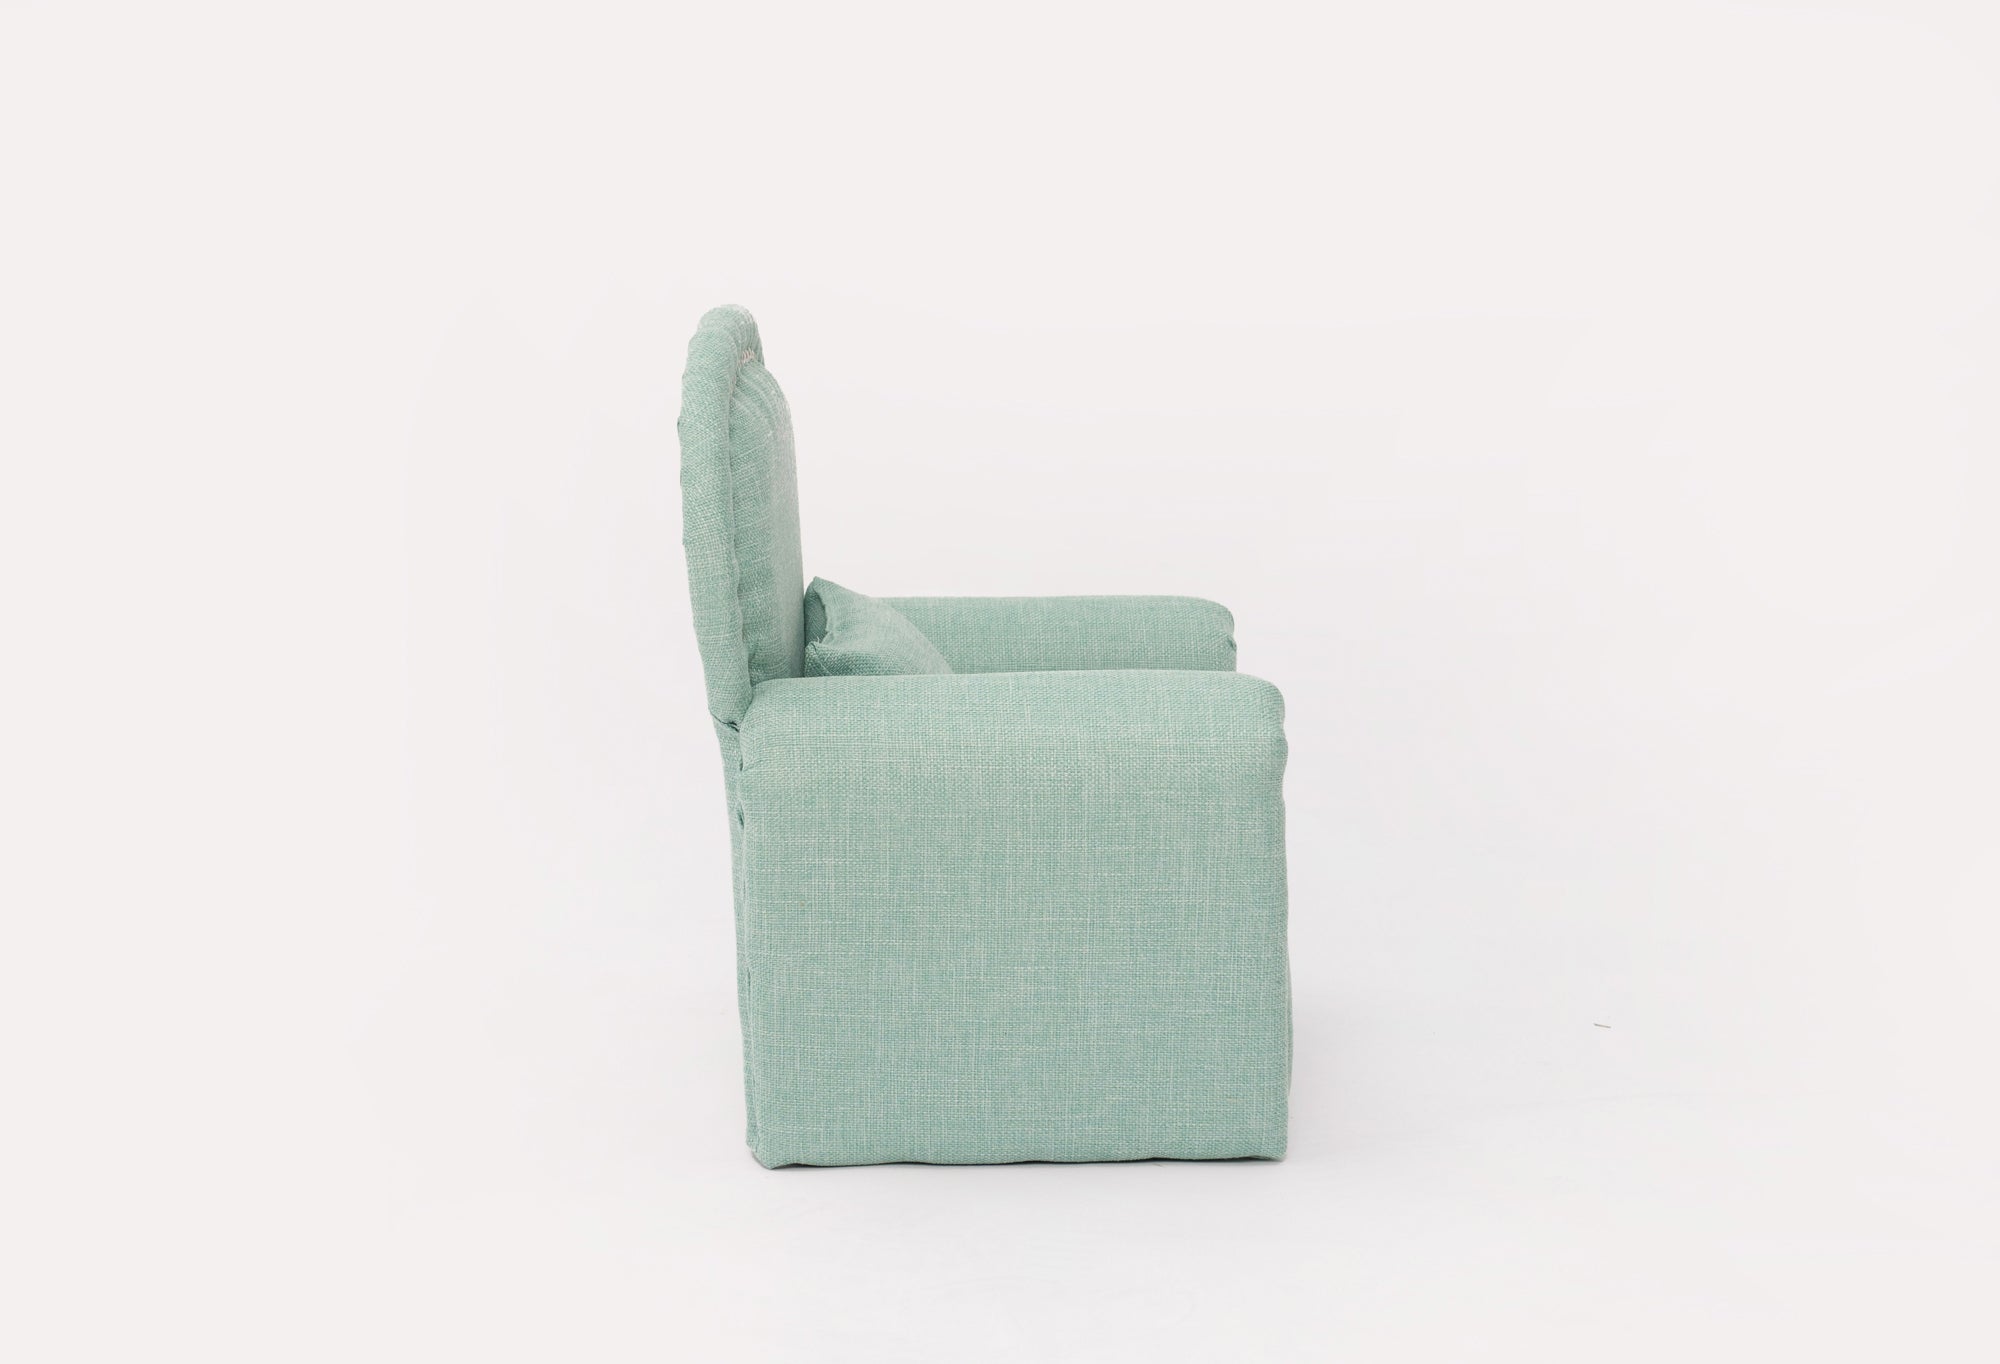 Kate Green Fabric Mini Sofa with Rivet Newborn Props for Photography